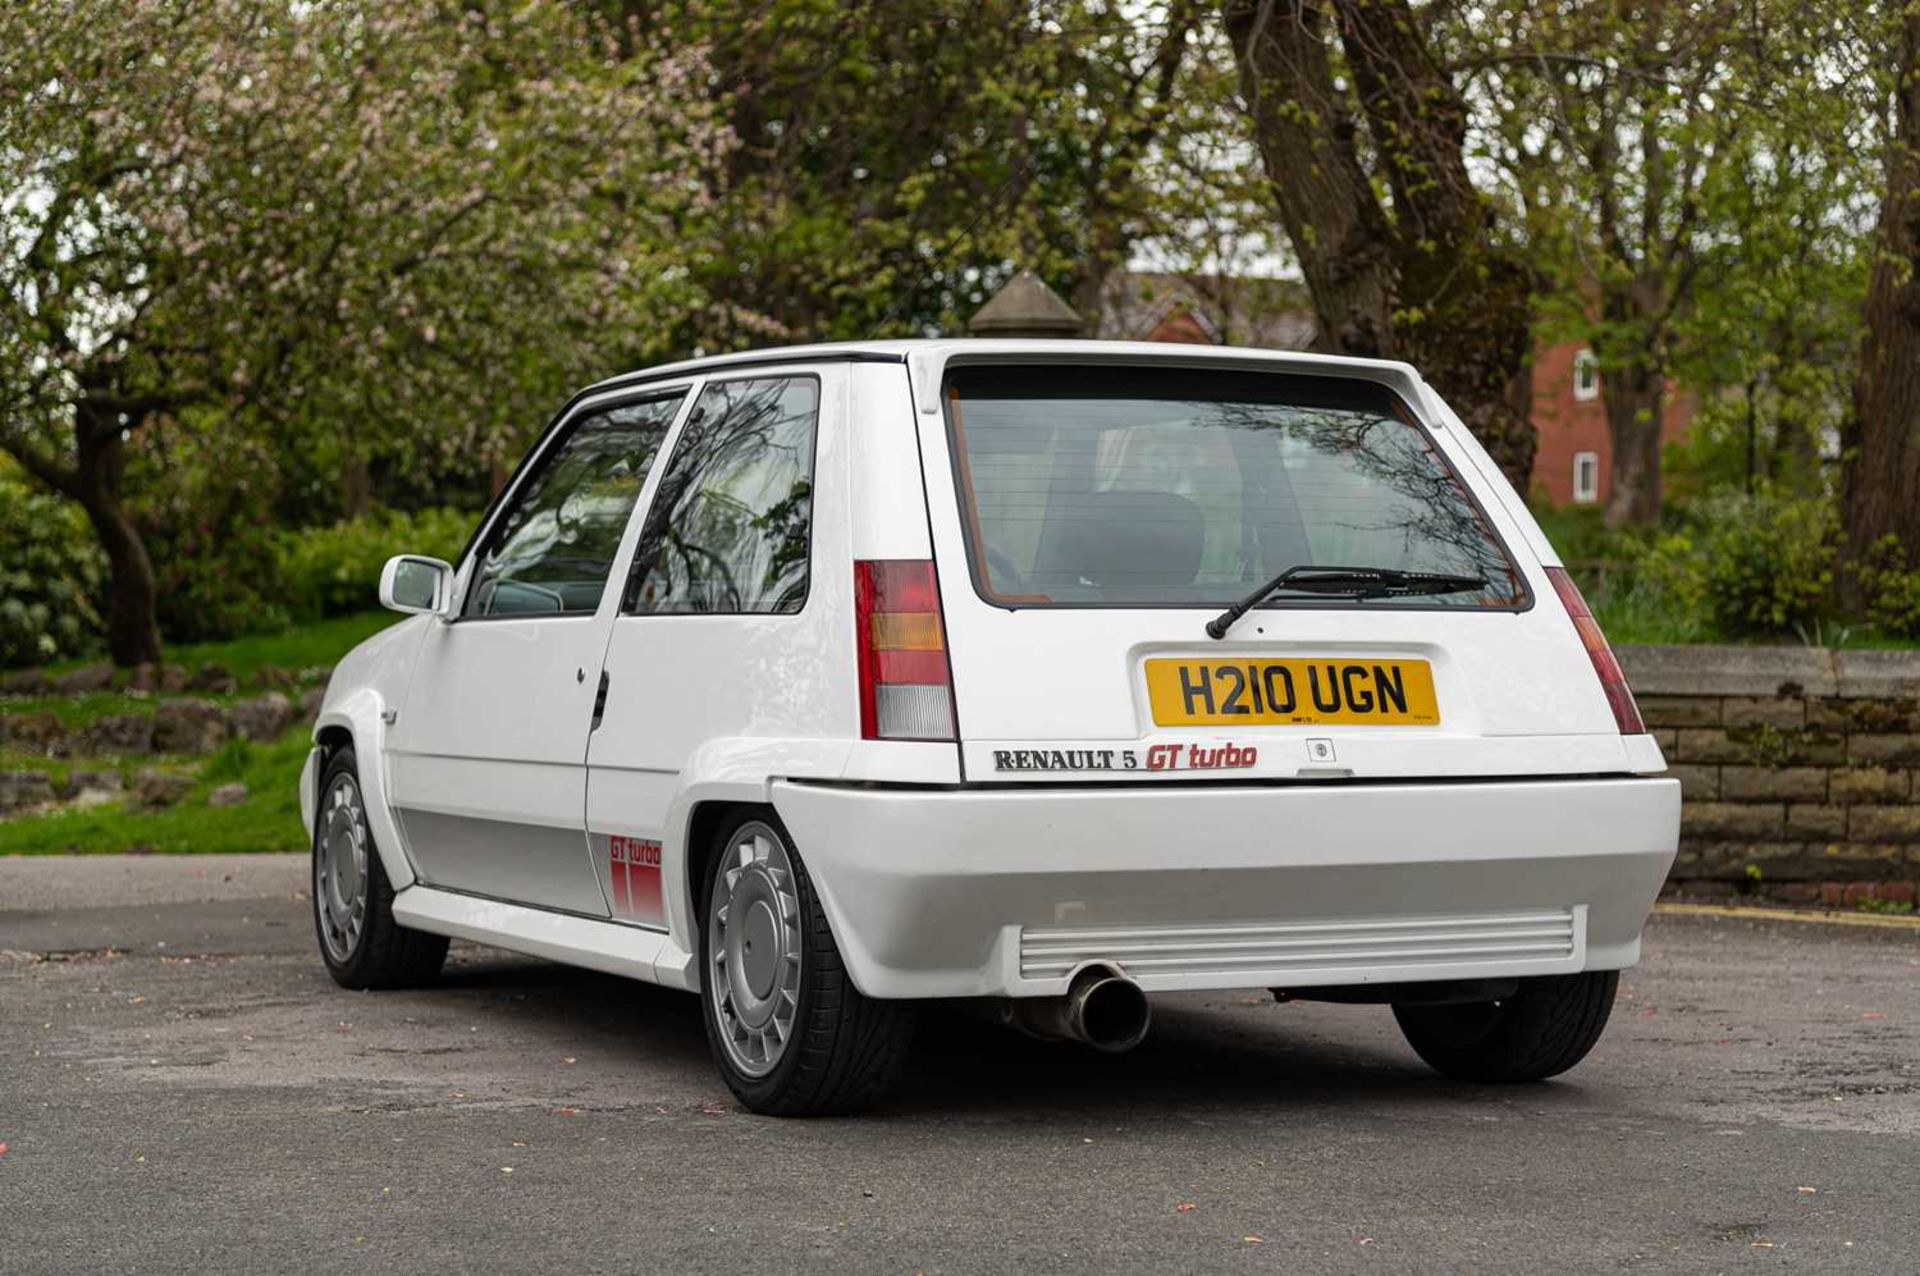 1990 Renault 5 GT Turbo - Image 12 of 79